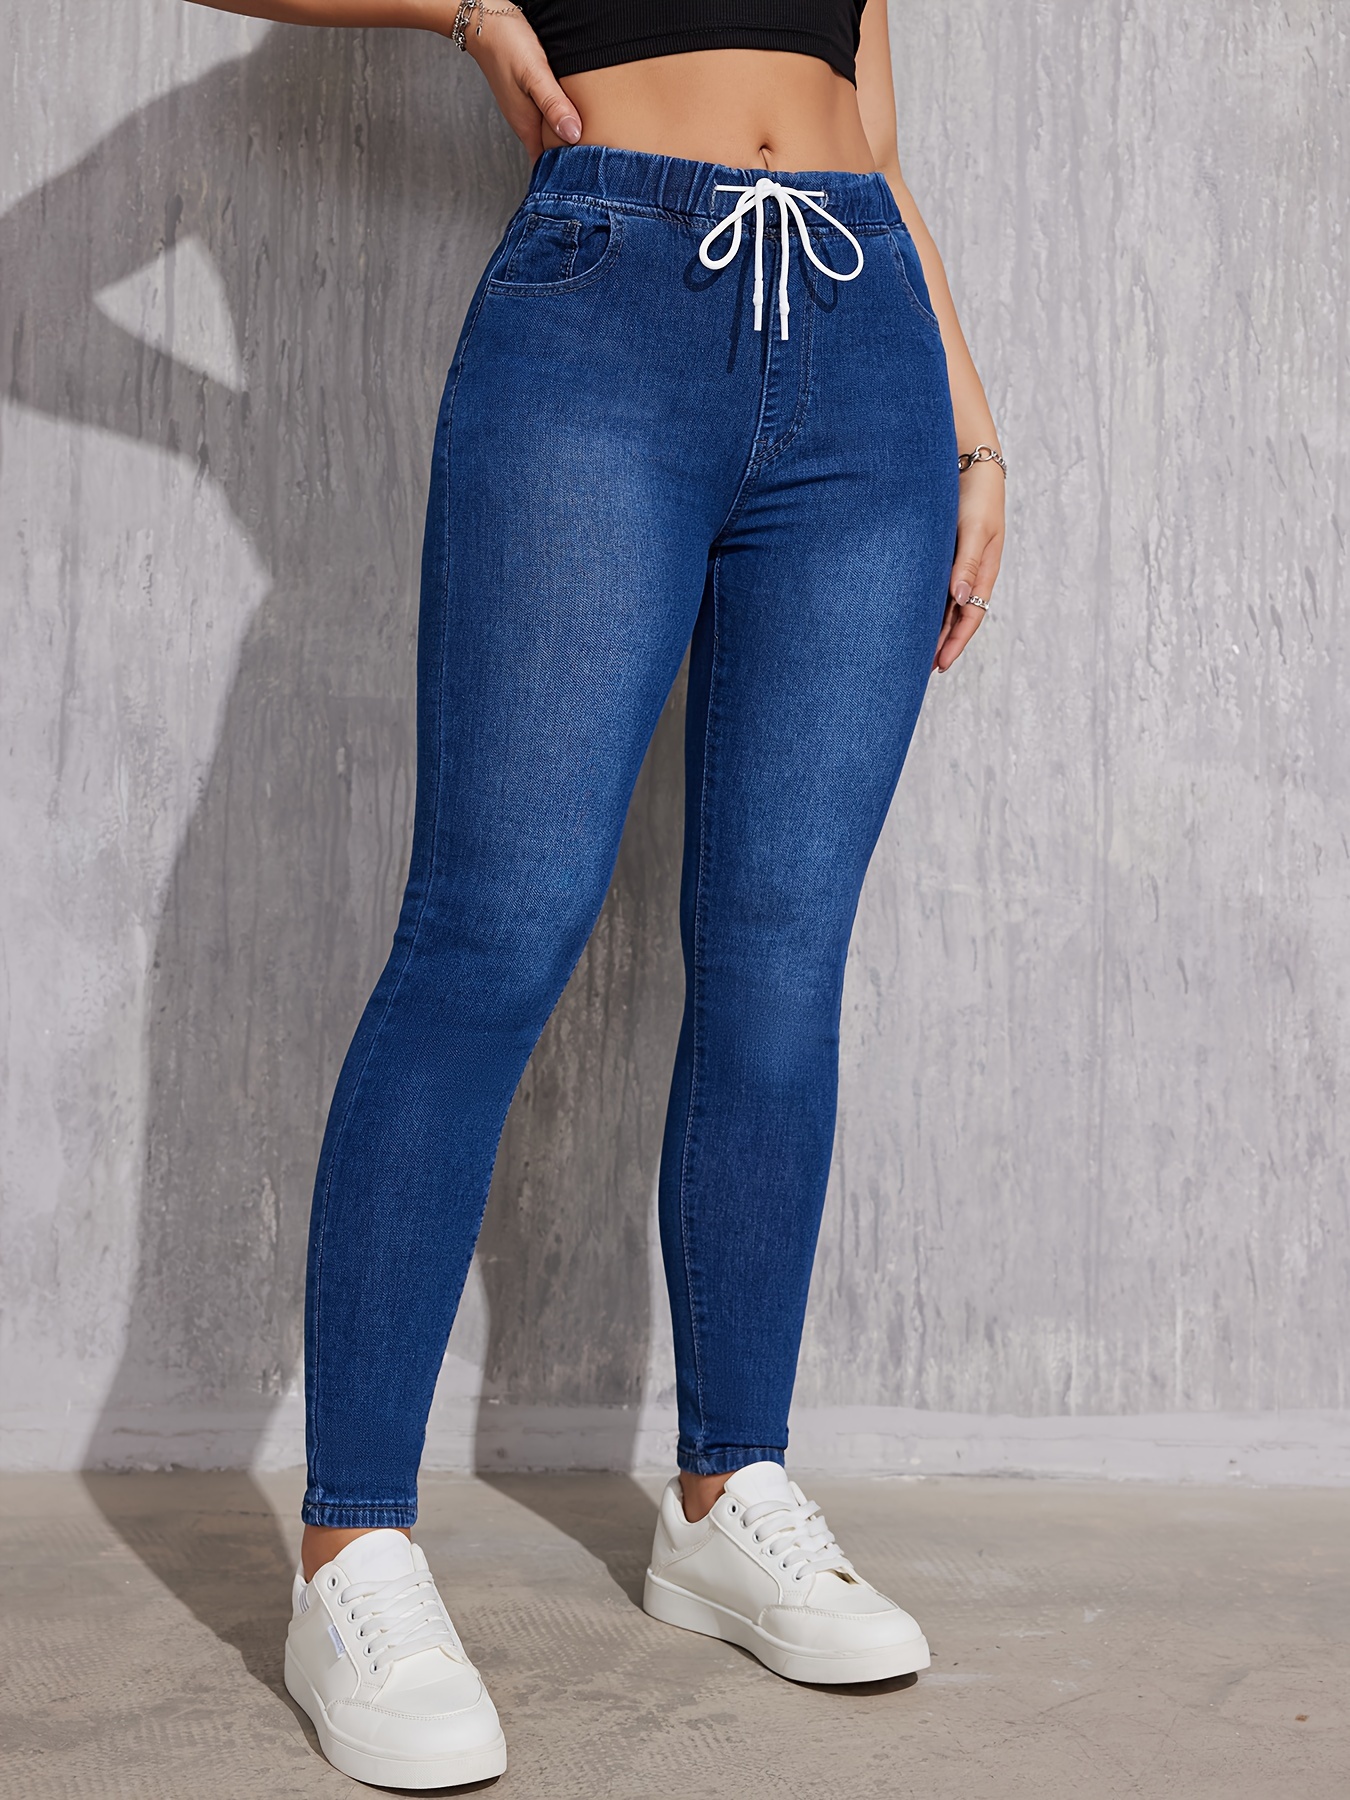 Jeans tights for women with a good fit and high waist